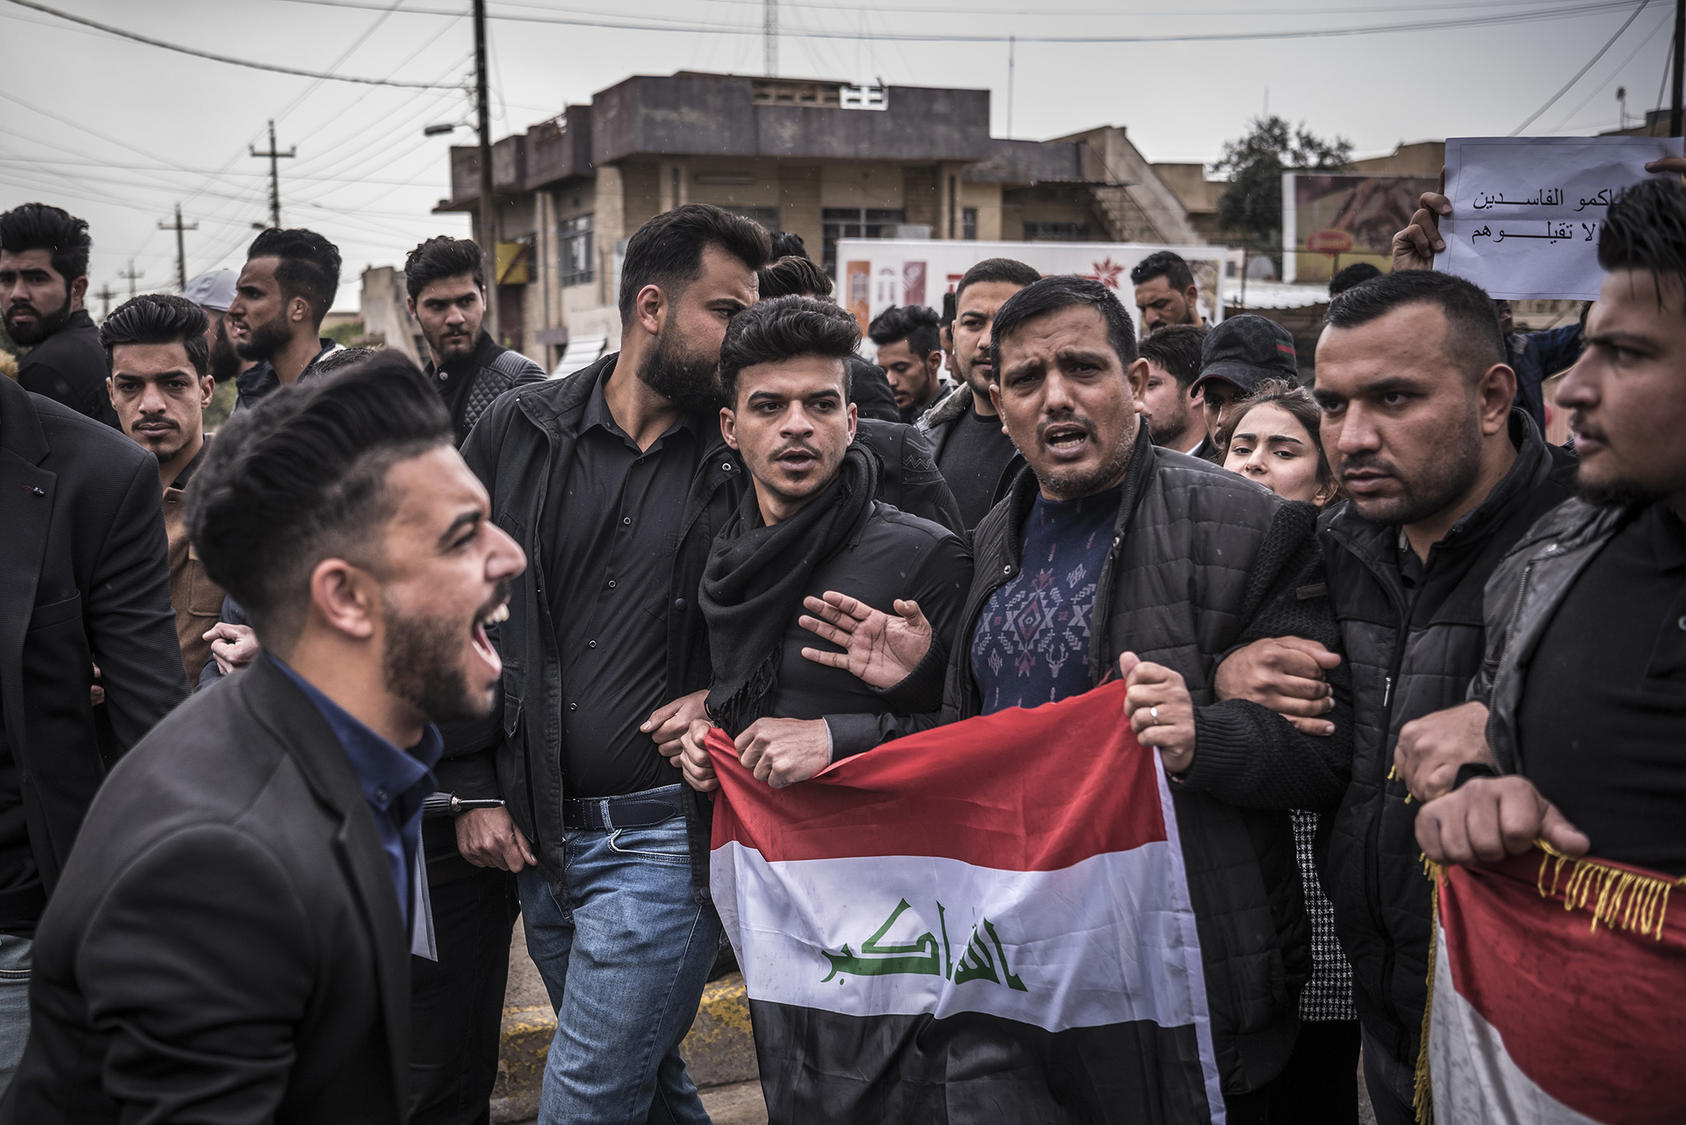 Iraqis chant slogans during a protest in Mosul, March 24, 2019. (Sergey Ponomarev/The New York Times)